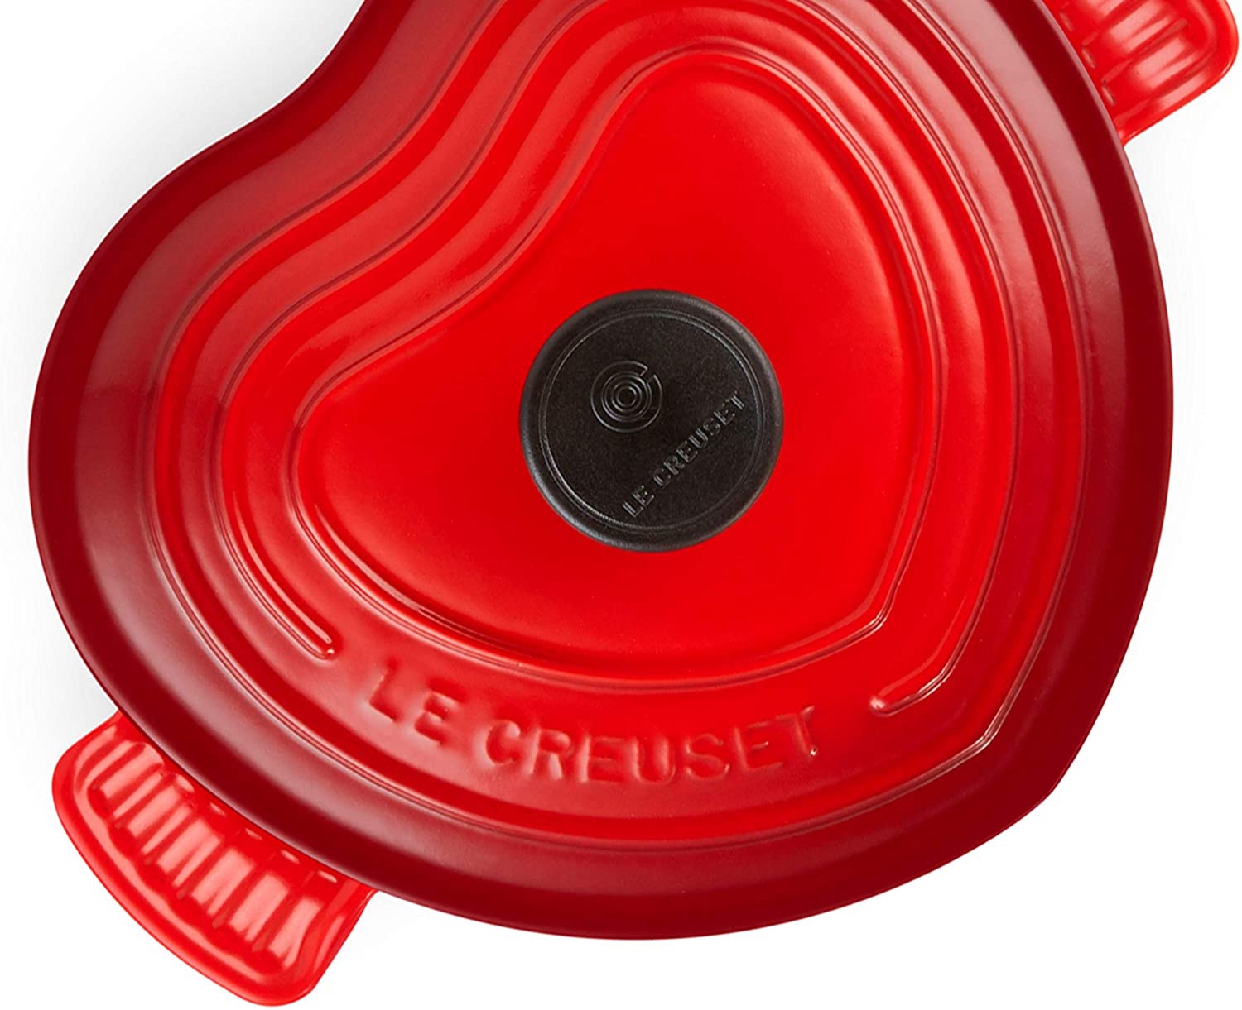 LE CREUSET(ル・クルーゼ) ココット・ダムールの商品画像サムネ2 